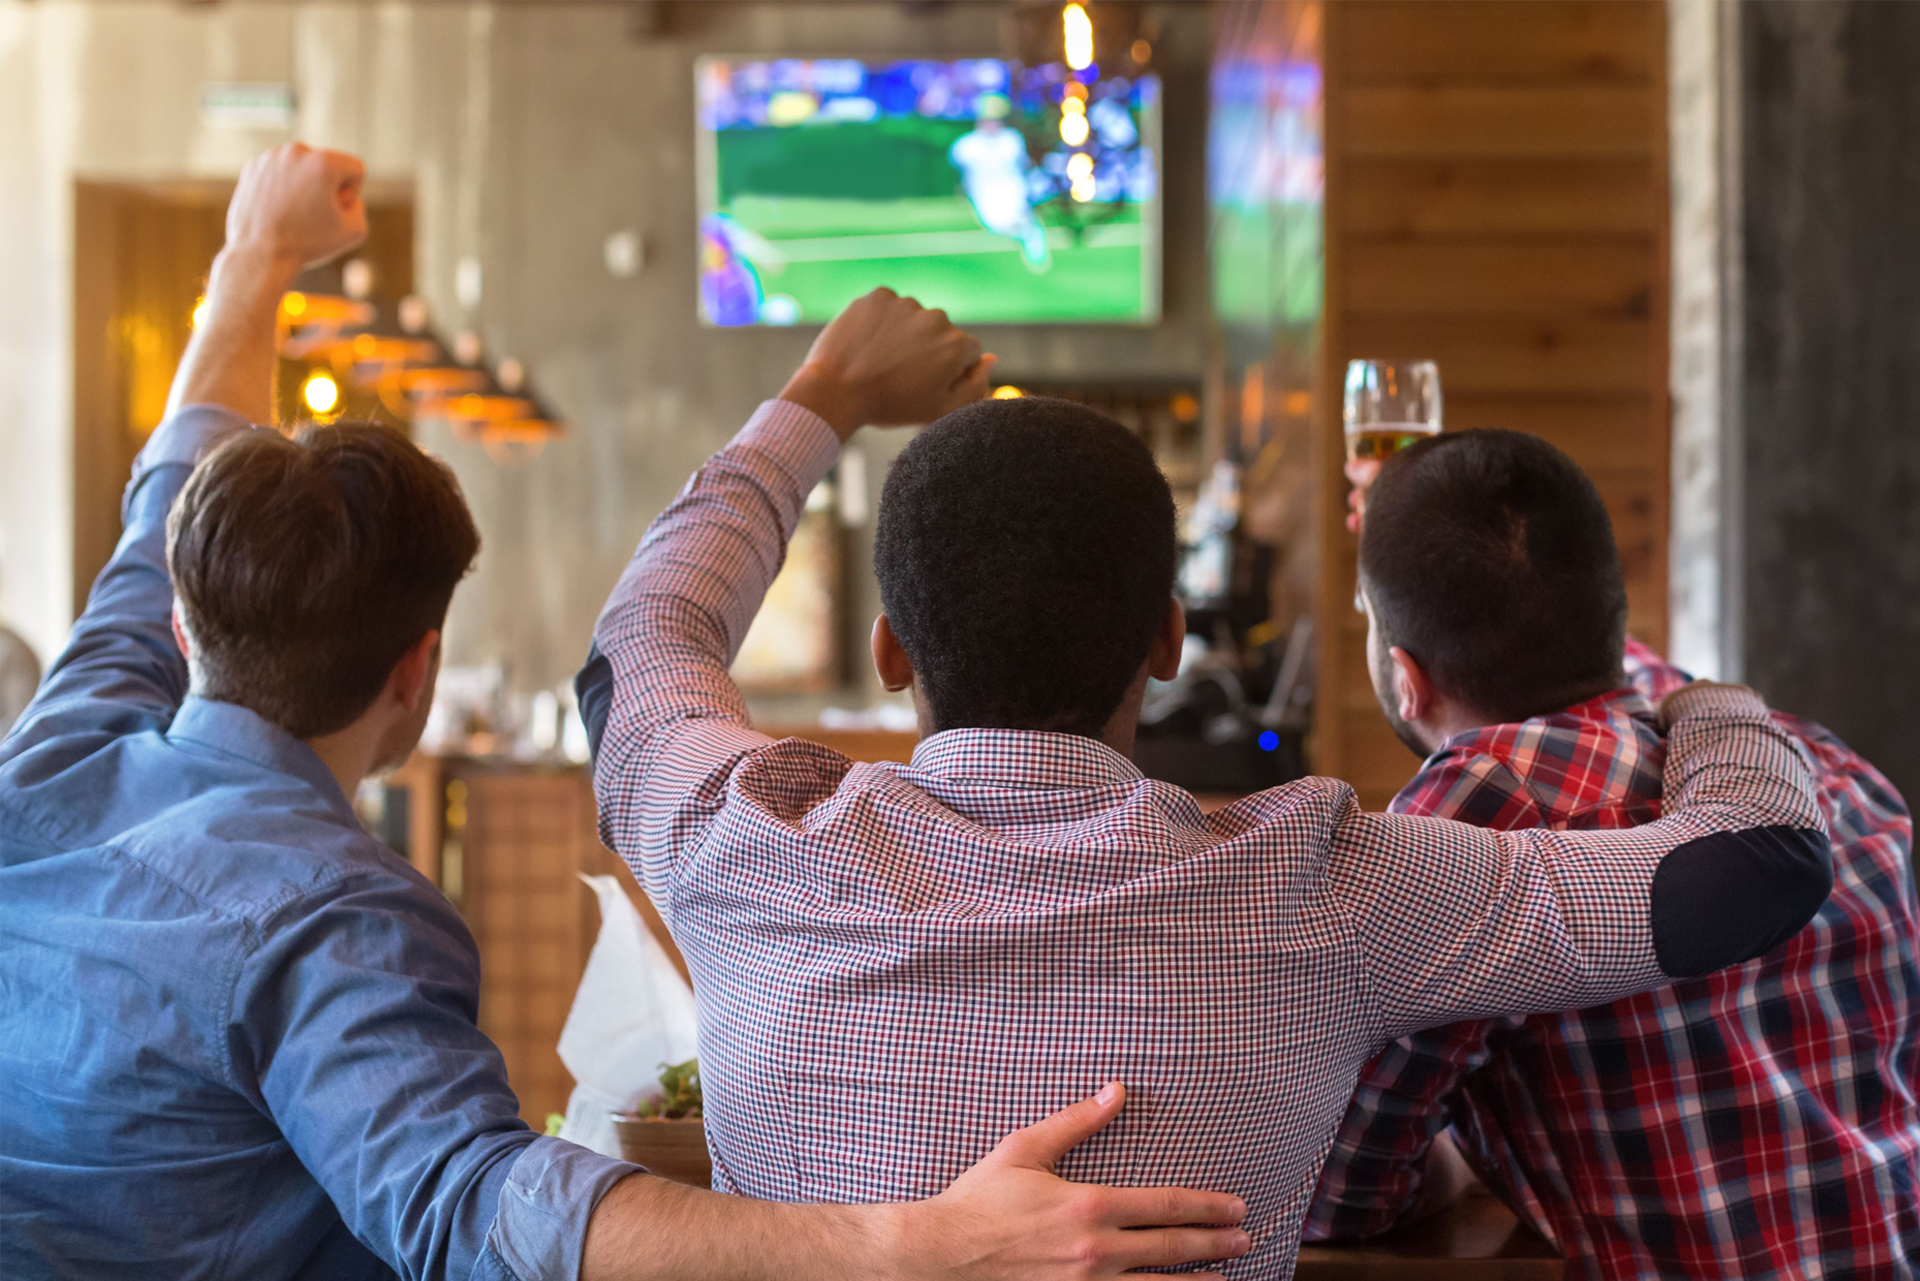 Mates watching the match in a pub